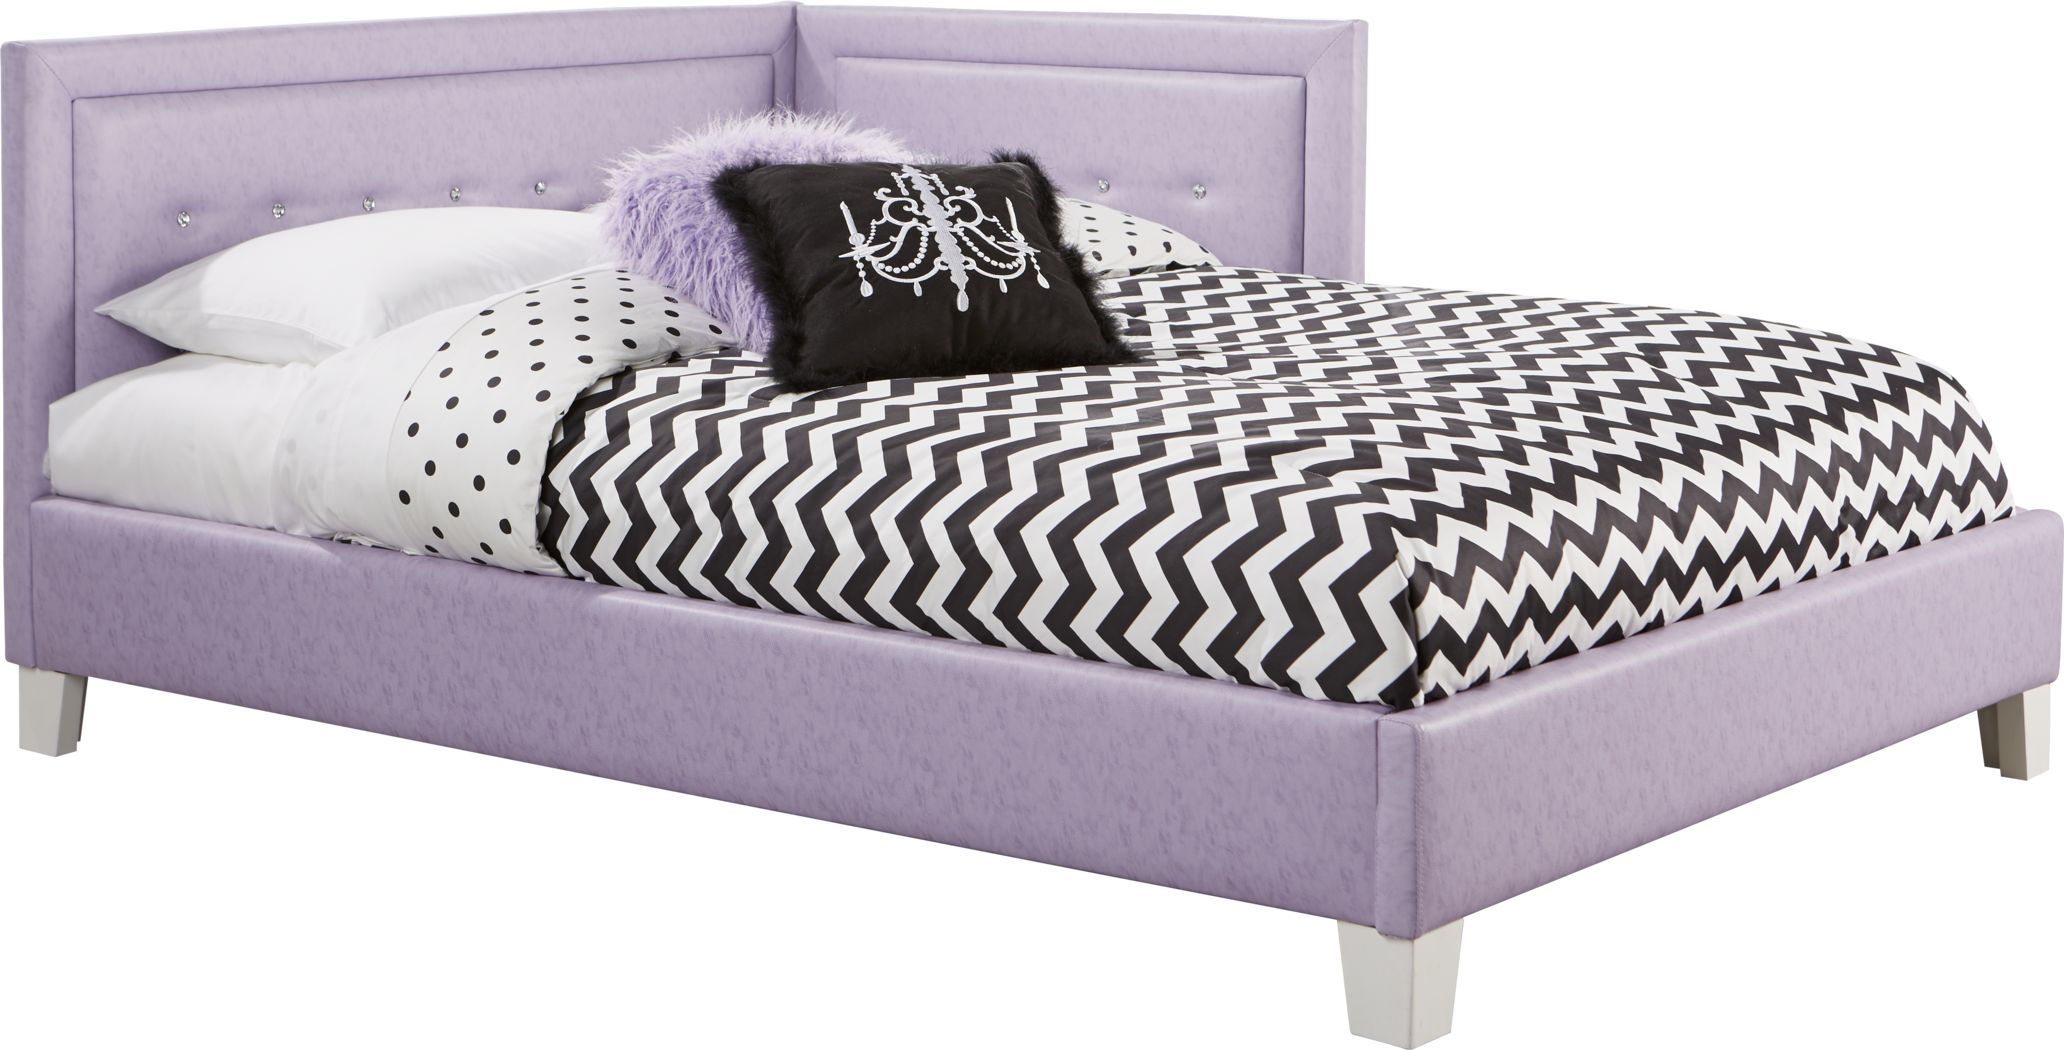 twin size girl bed frame